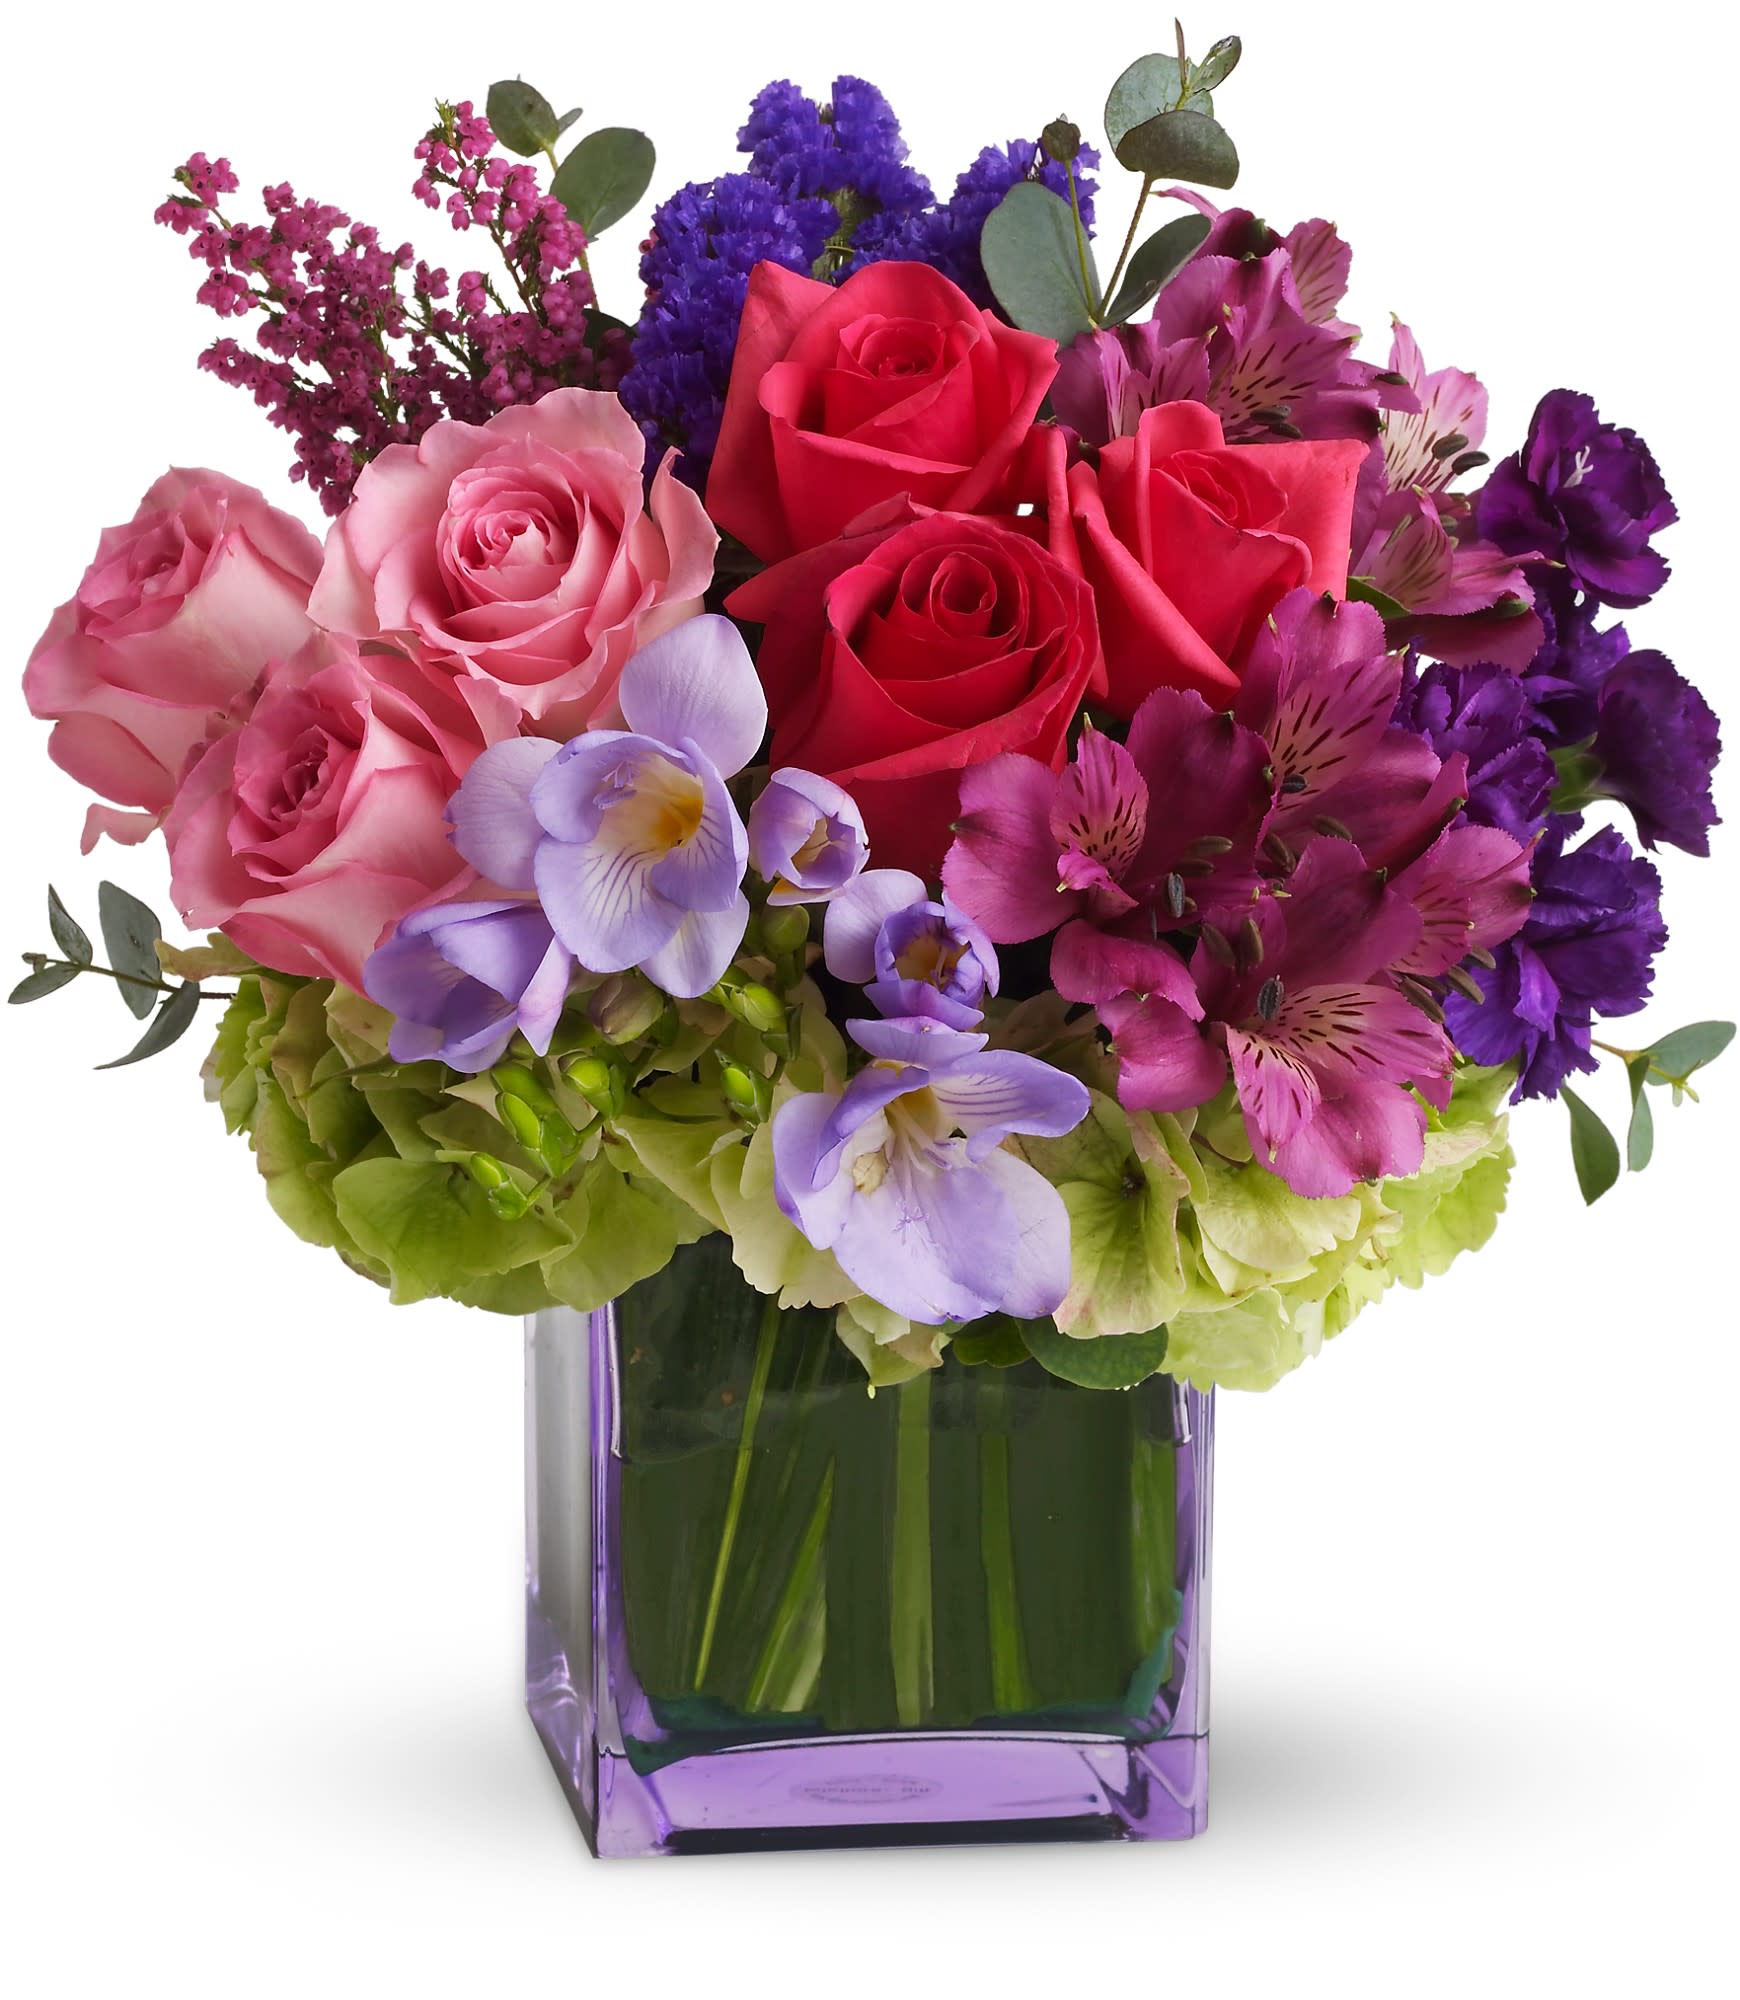 Exquisite Beauty - No other name could possibly describe this exquisitely beautiful bouquet. Its brilliant blossoms are gorgeously arranged and delivered in an exclusive lavender vase. Let her know how special she is to you by sending this fabulous gift.